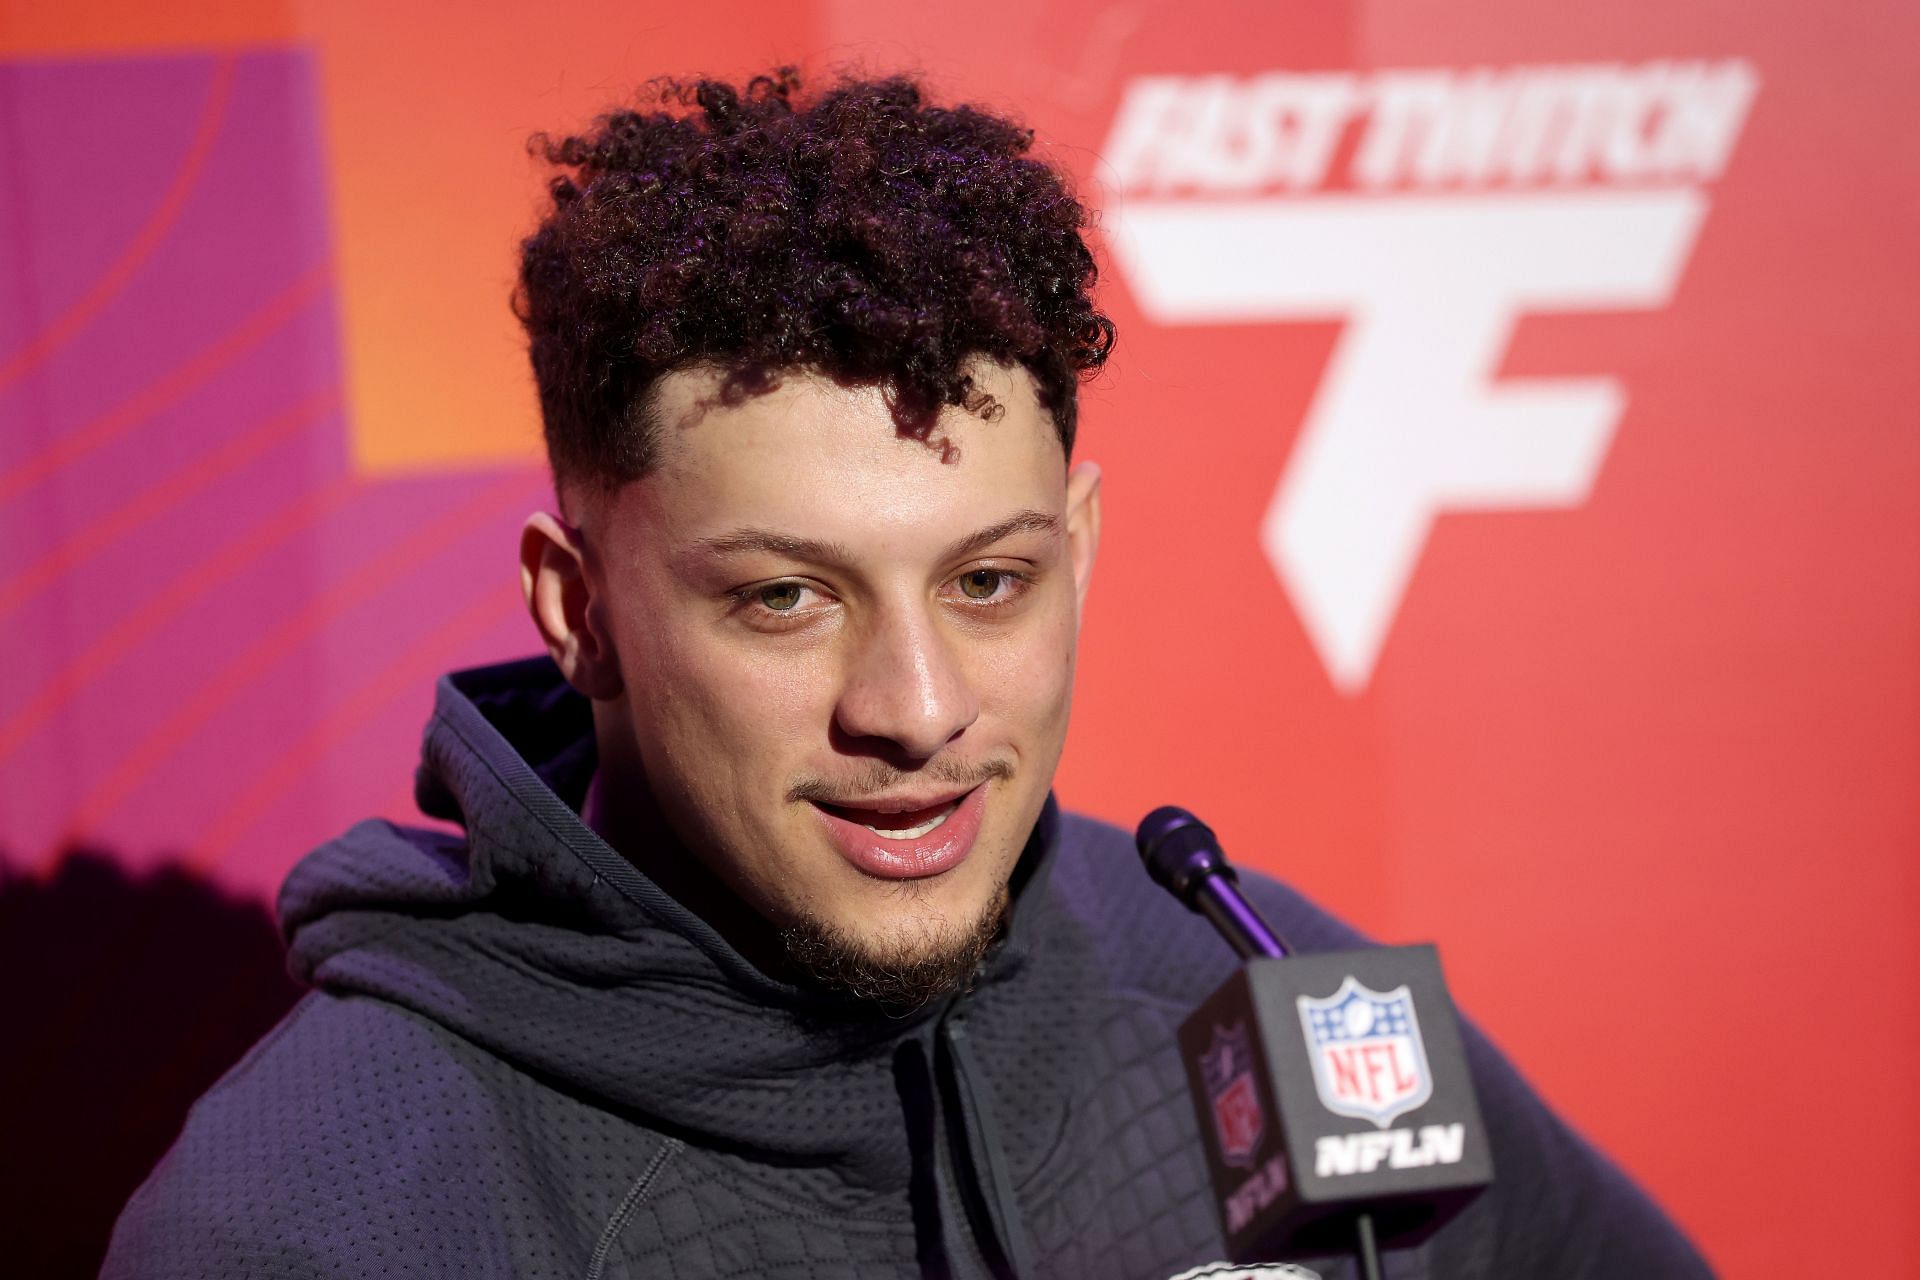 Patrick Mahomes at Opening Night presented by Fast Twitch